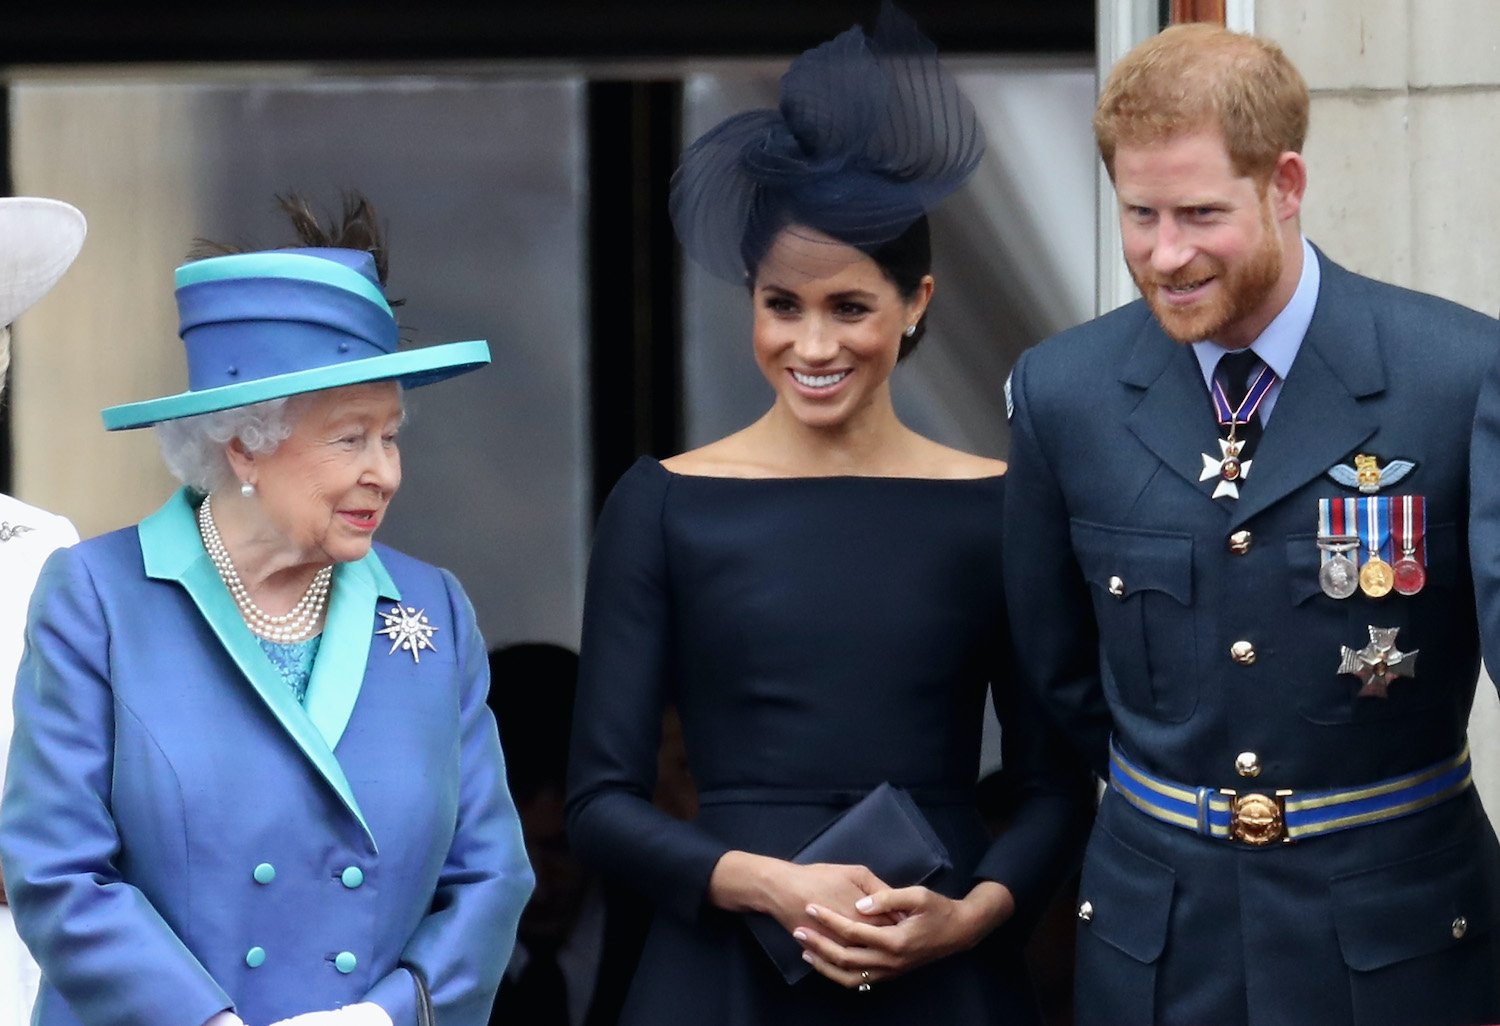 Queen Elizabeth II, Meghan Markle, and Prince Harry watch the RAF flypast on the balcony of Buckingham Palace, as members of the Royal Family attend events to mark the centenary of the RAF